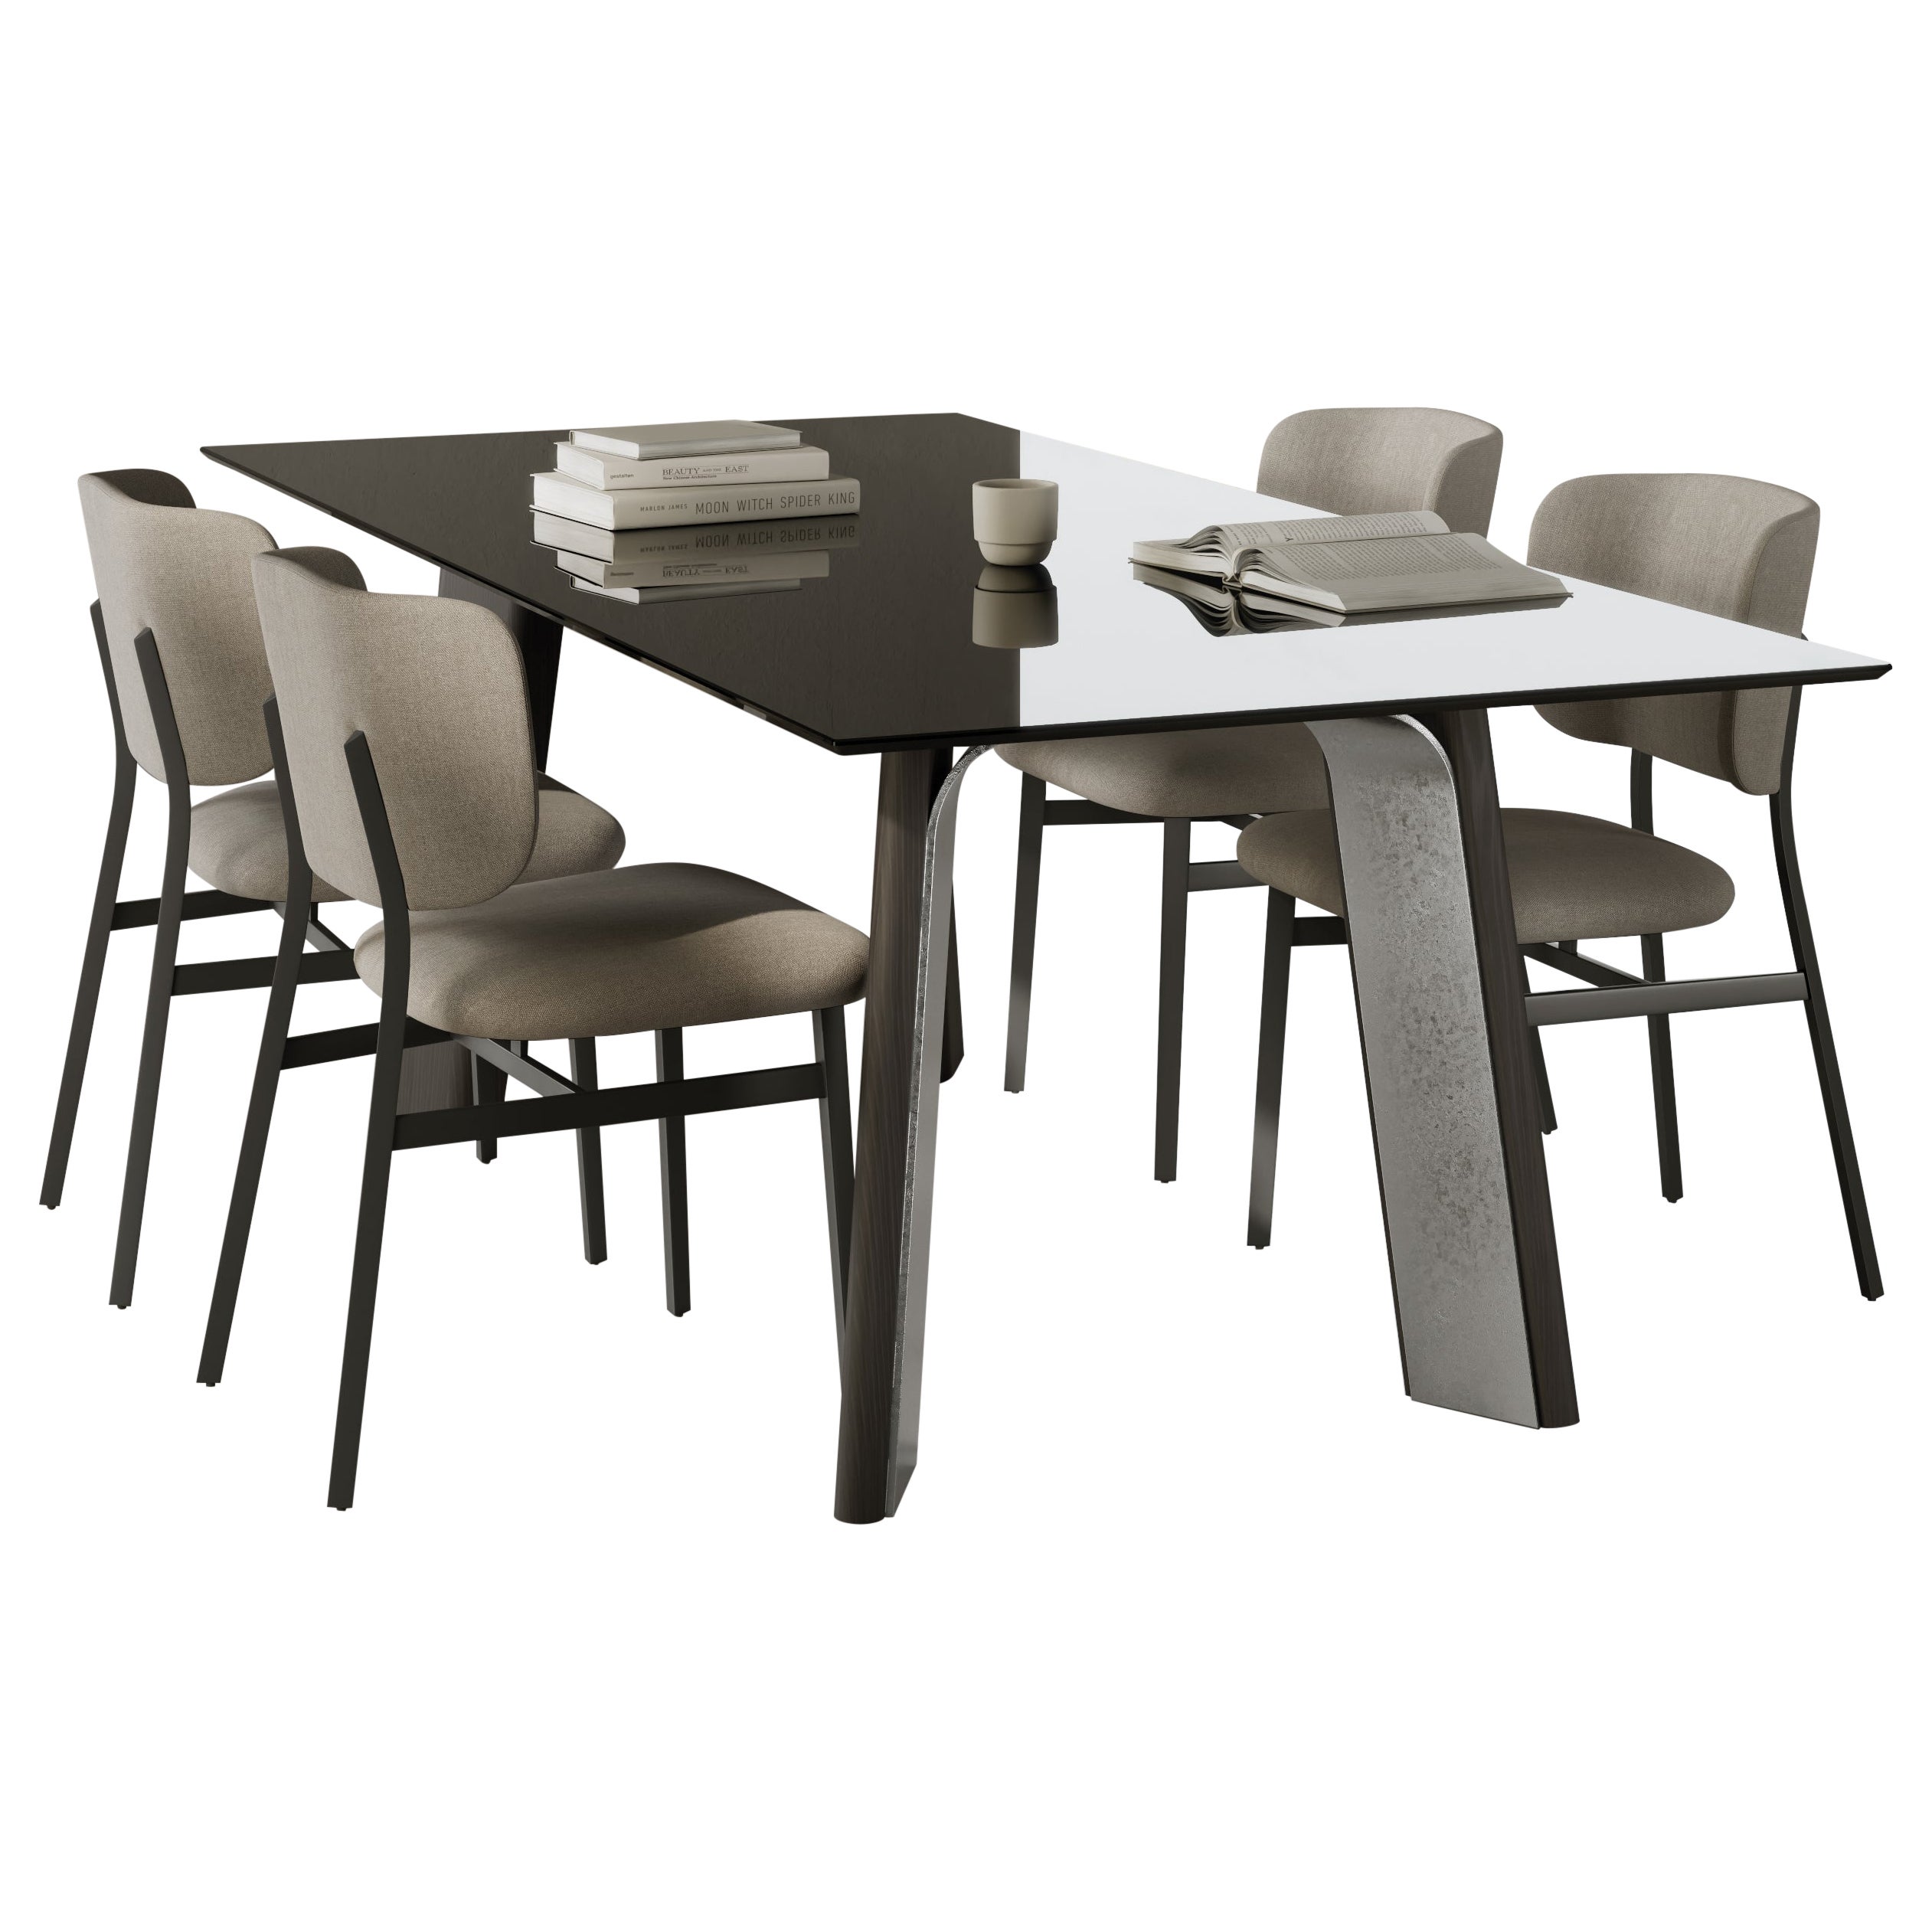 Afrodite Dining Table by Chinellato Design For Sale